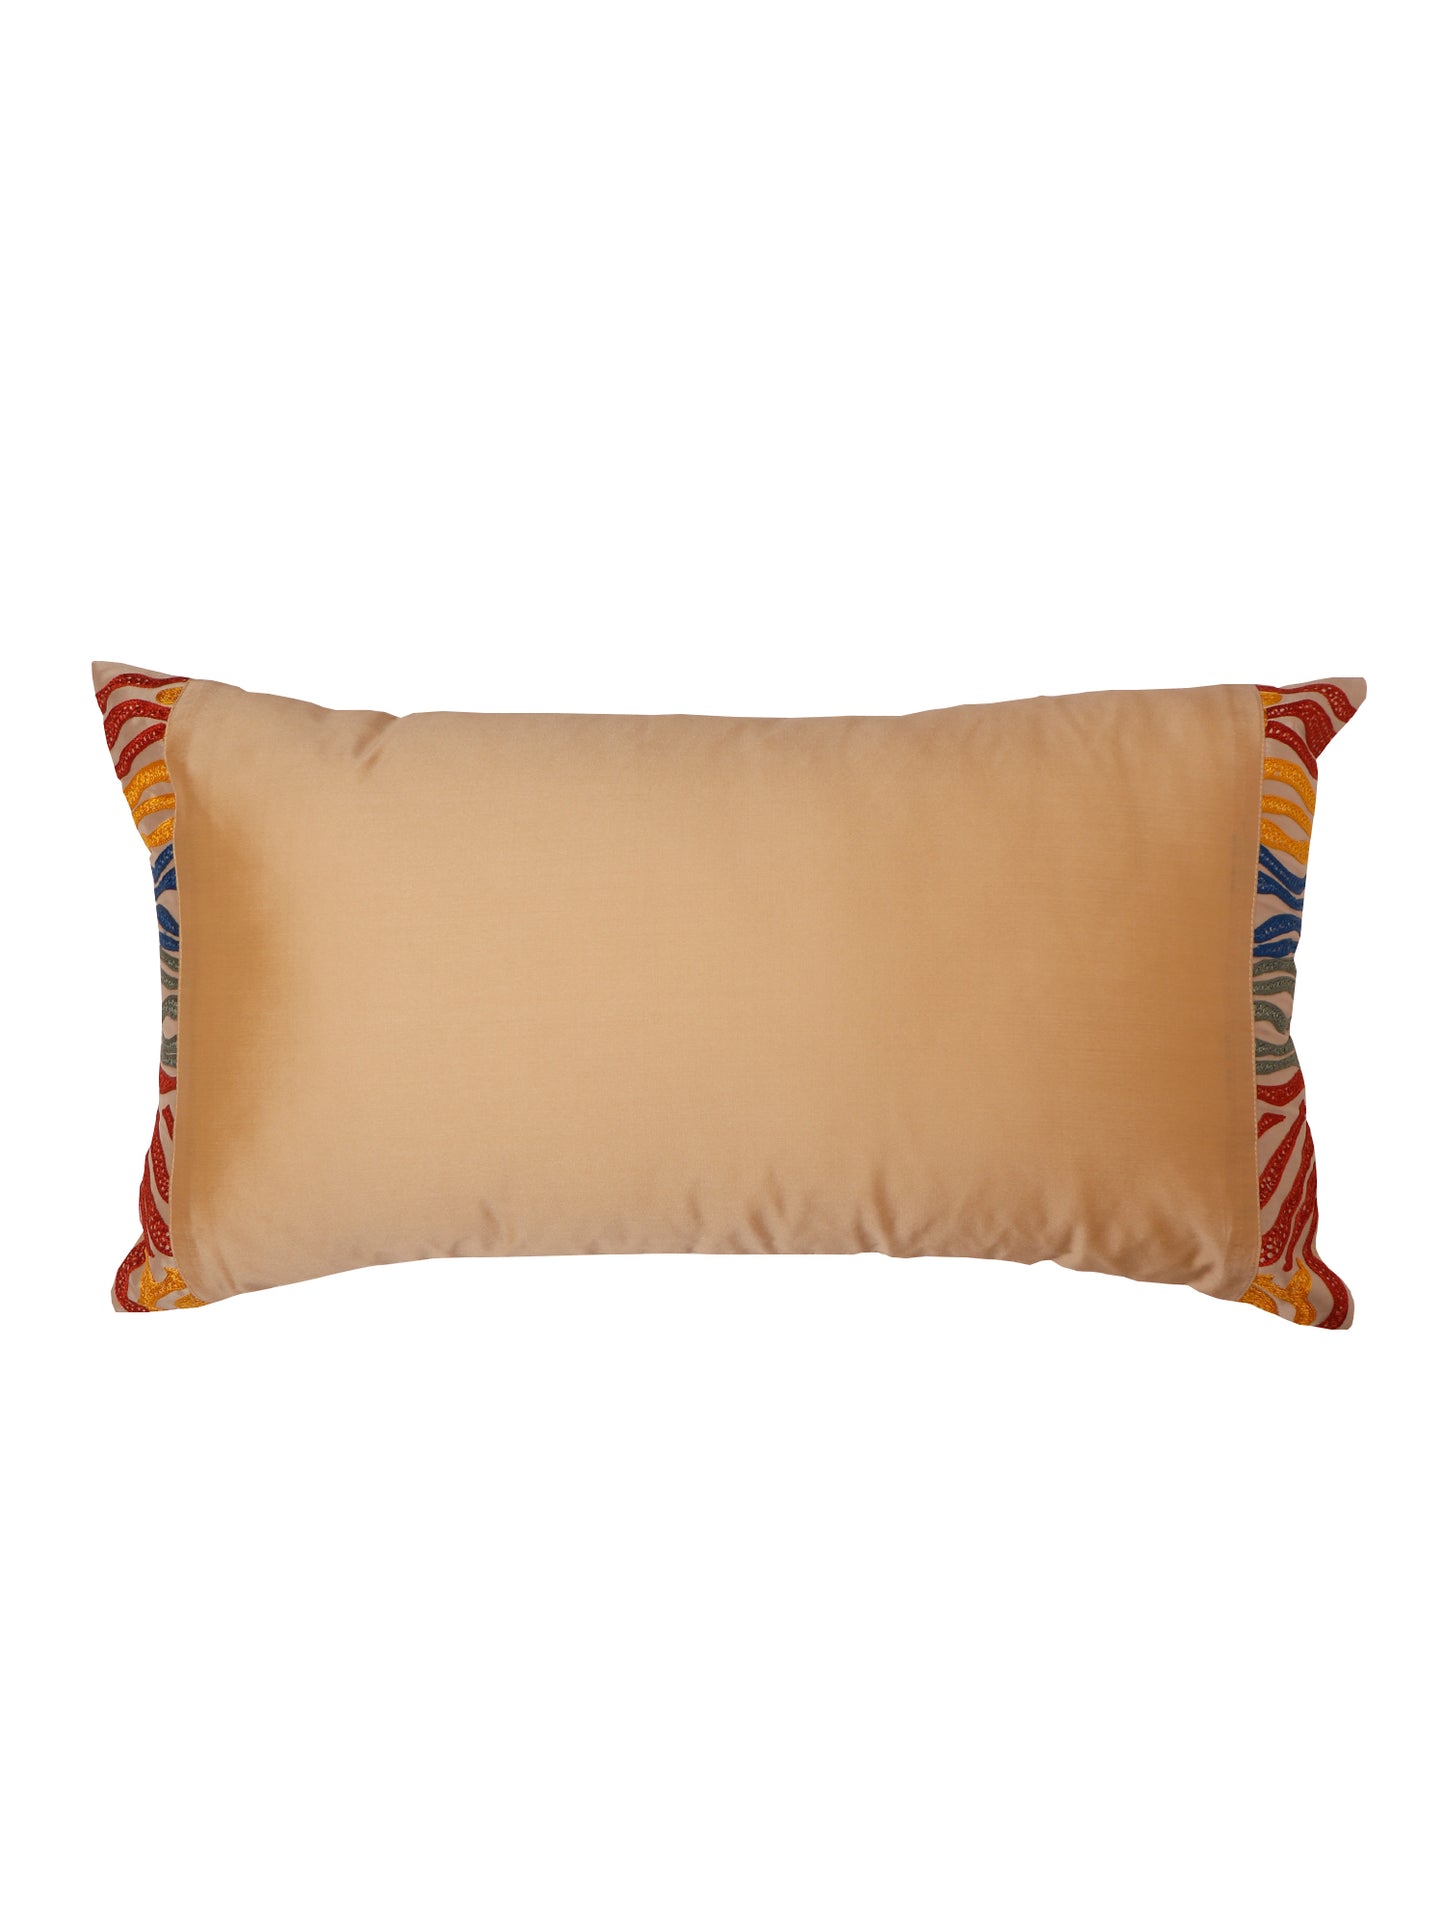 Cushion Cover Polyester patchwork with Aari Embroidery Gold - 16" x 16"